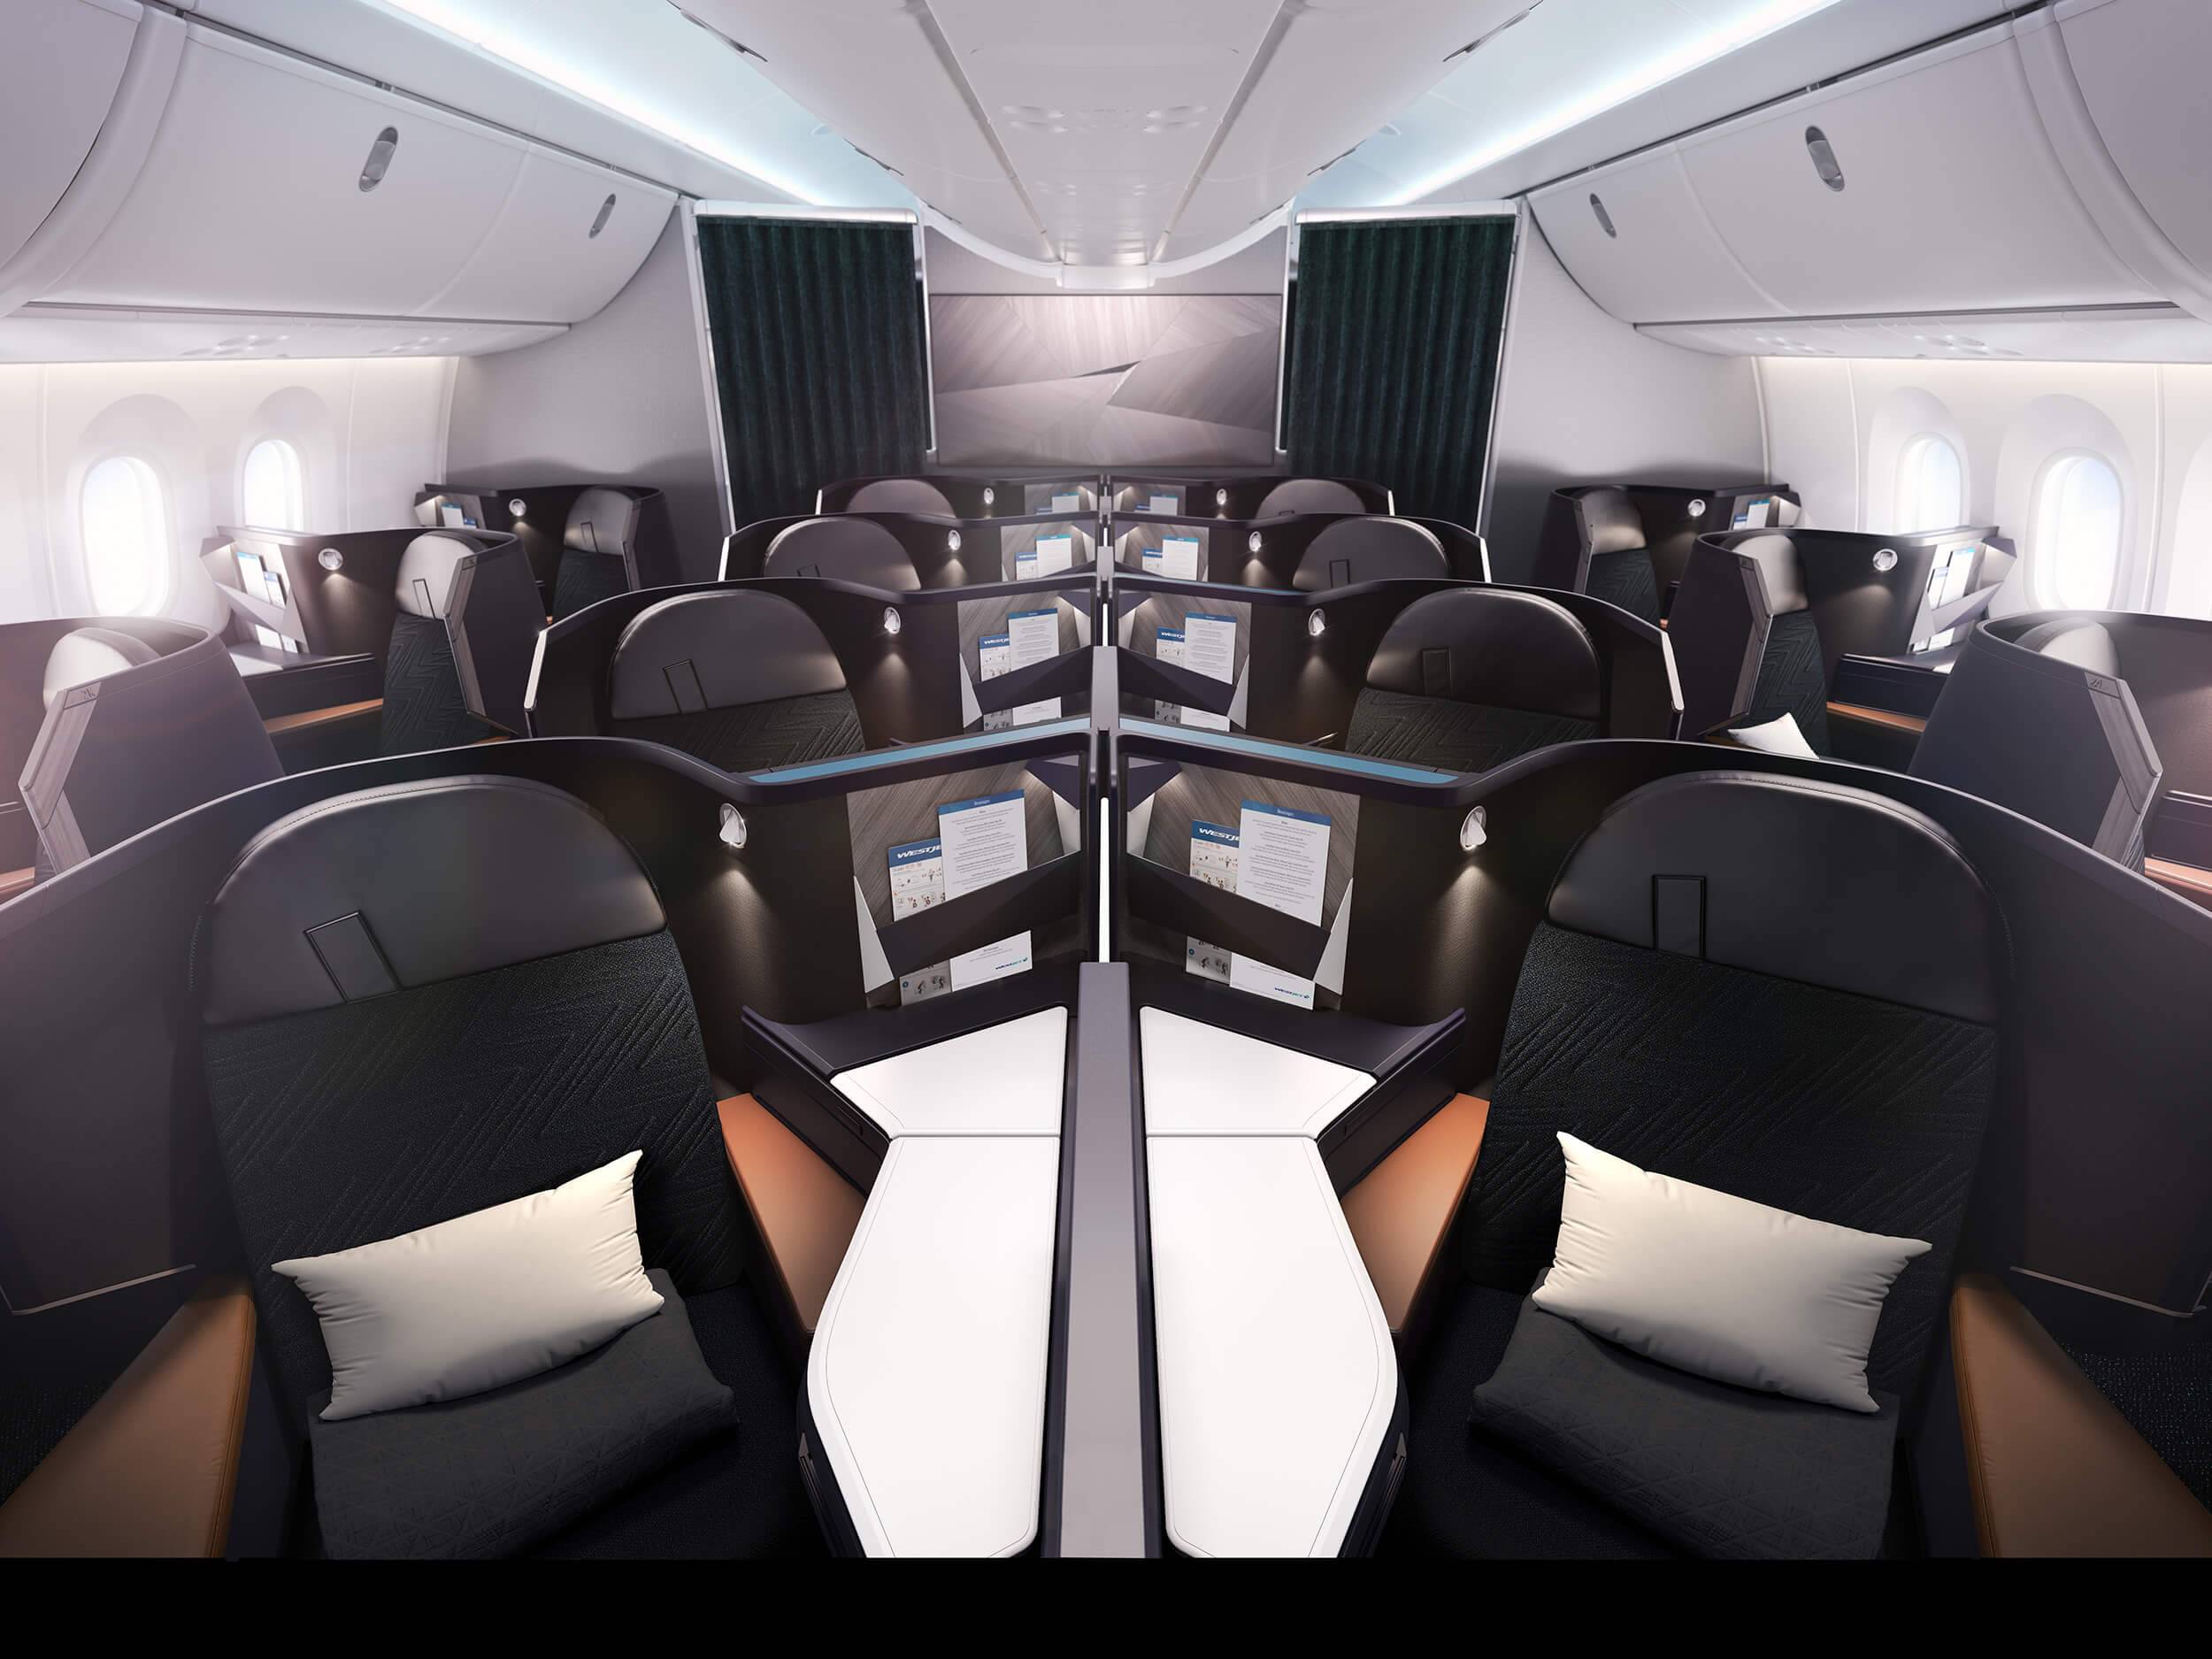 Full cabin view of the Business Class cabin onboard WestJet's B787 aircraft